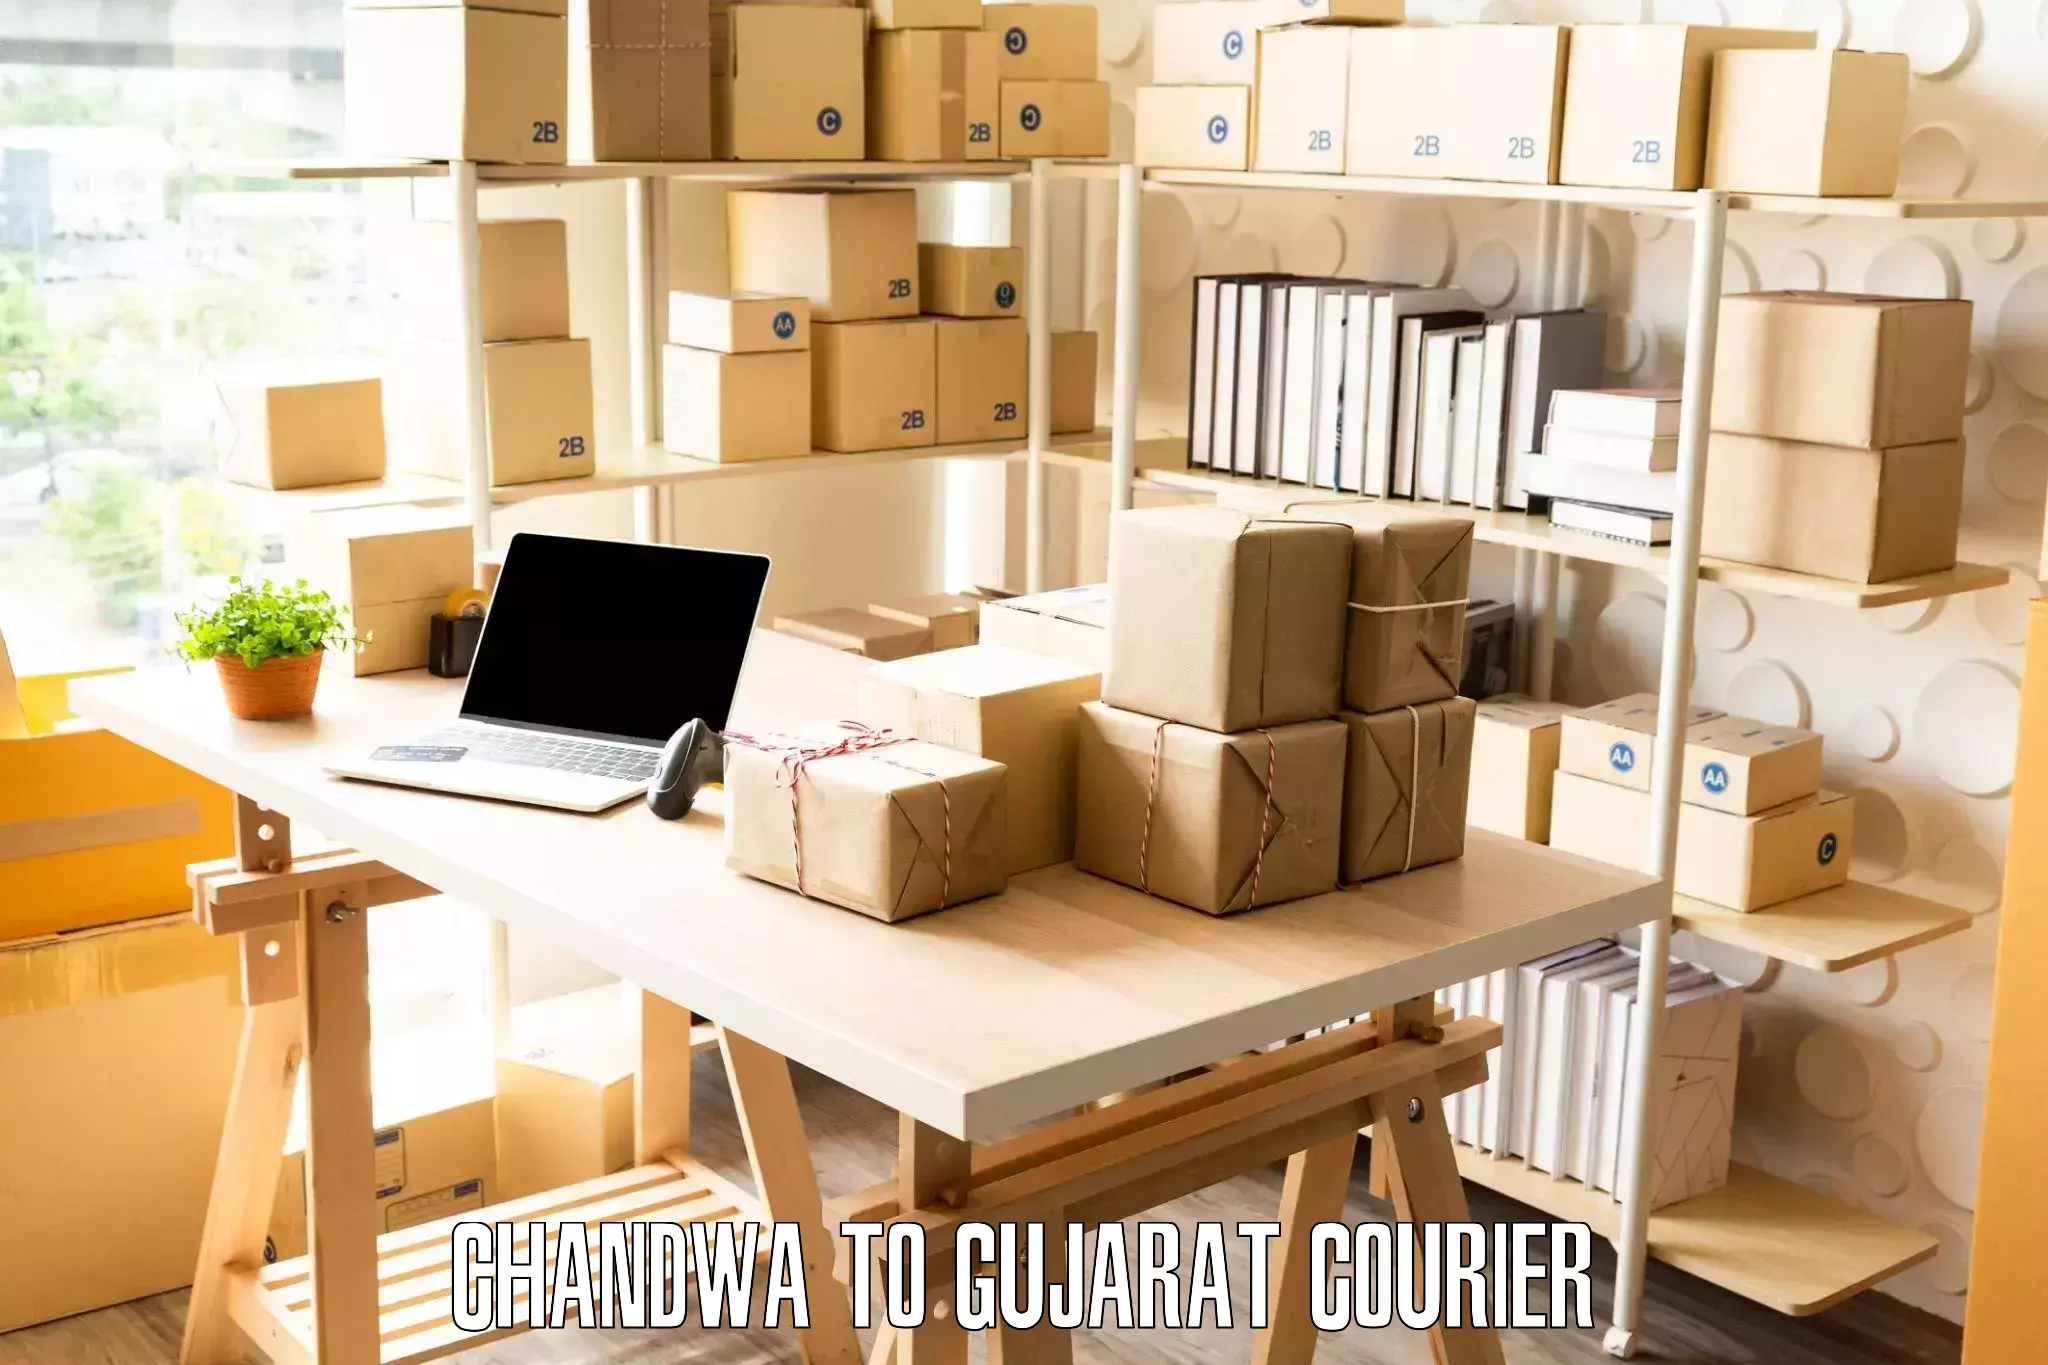 Quality moving and storage Chandwa to Rajkot